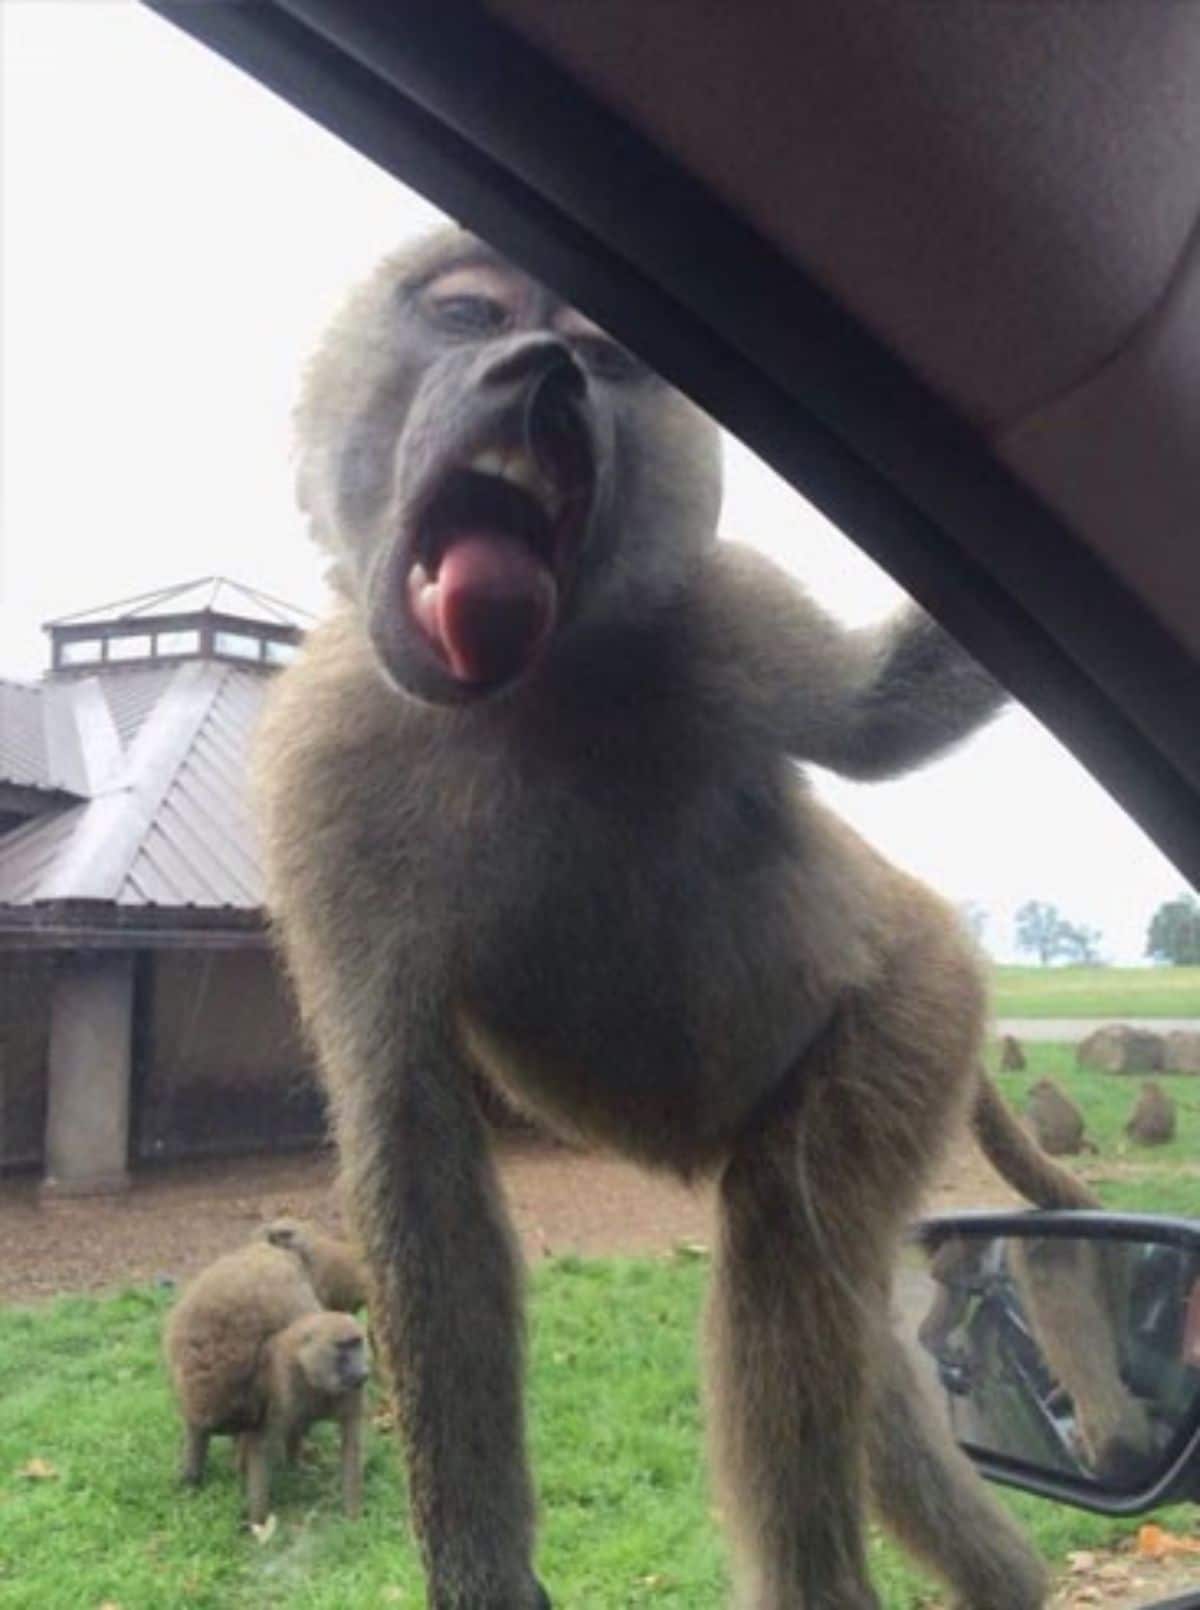 brown monkey hanging on to a car and licking the window